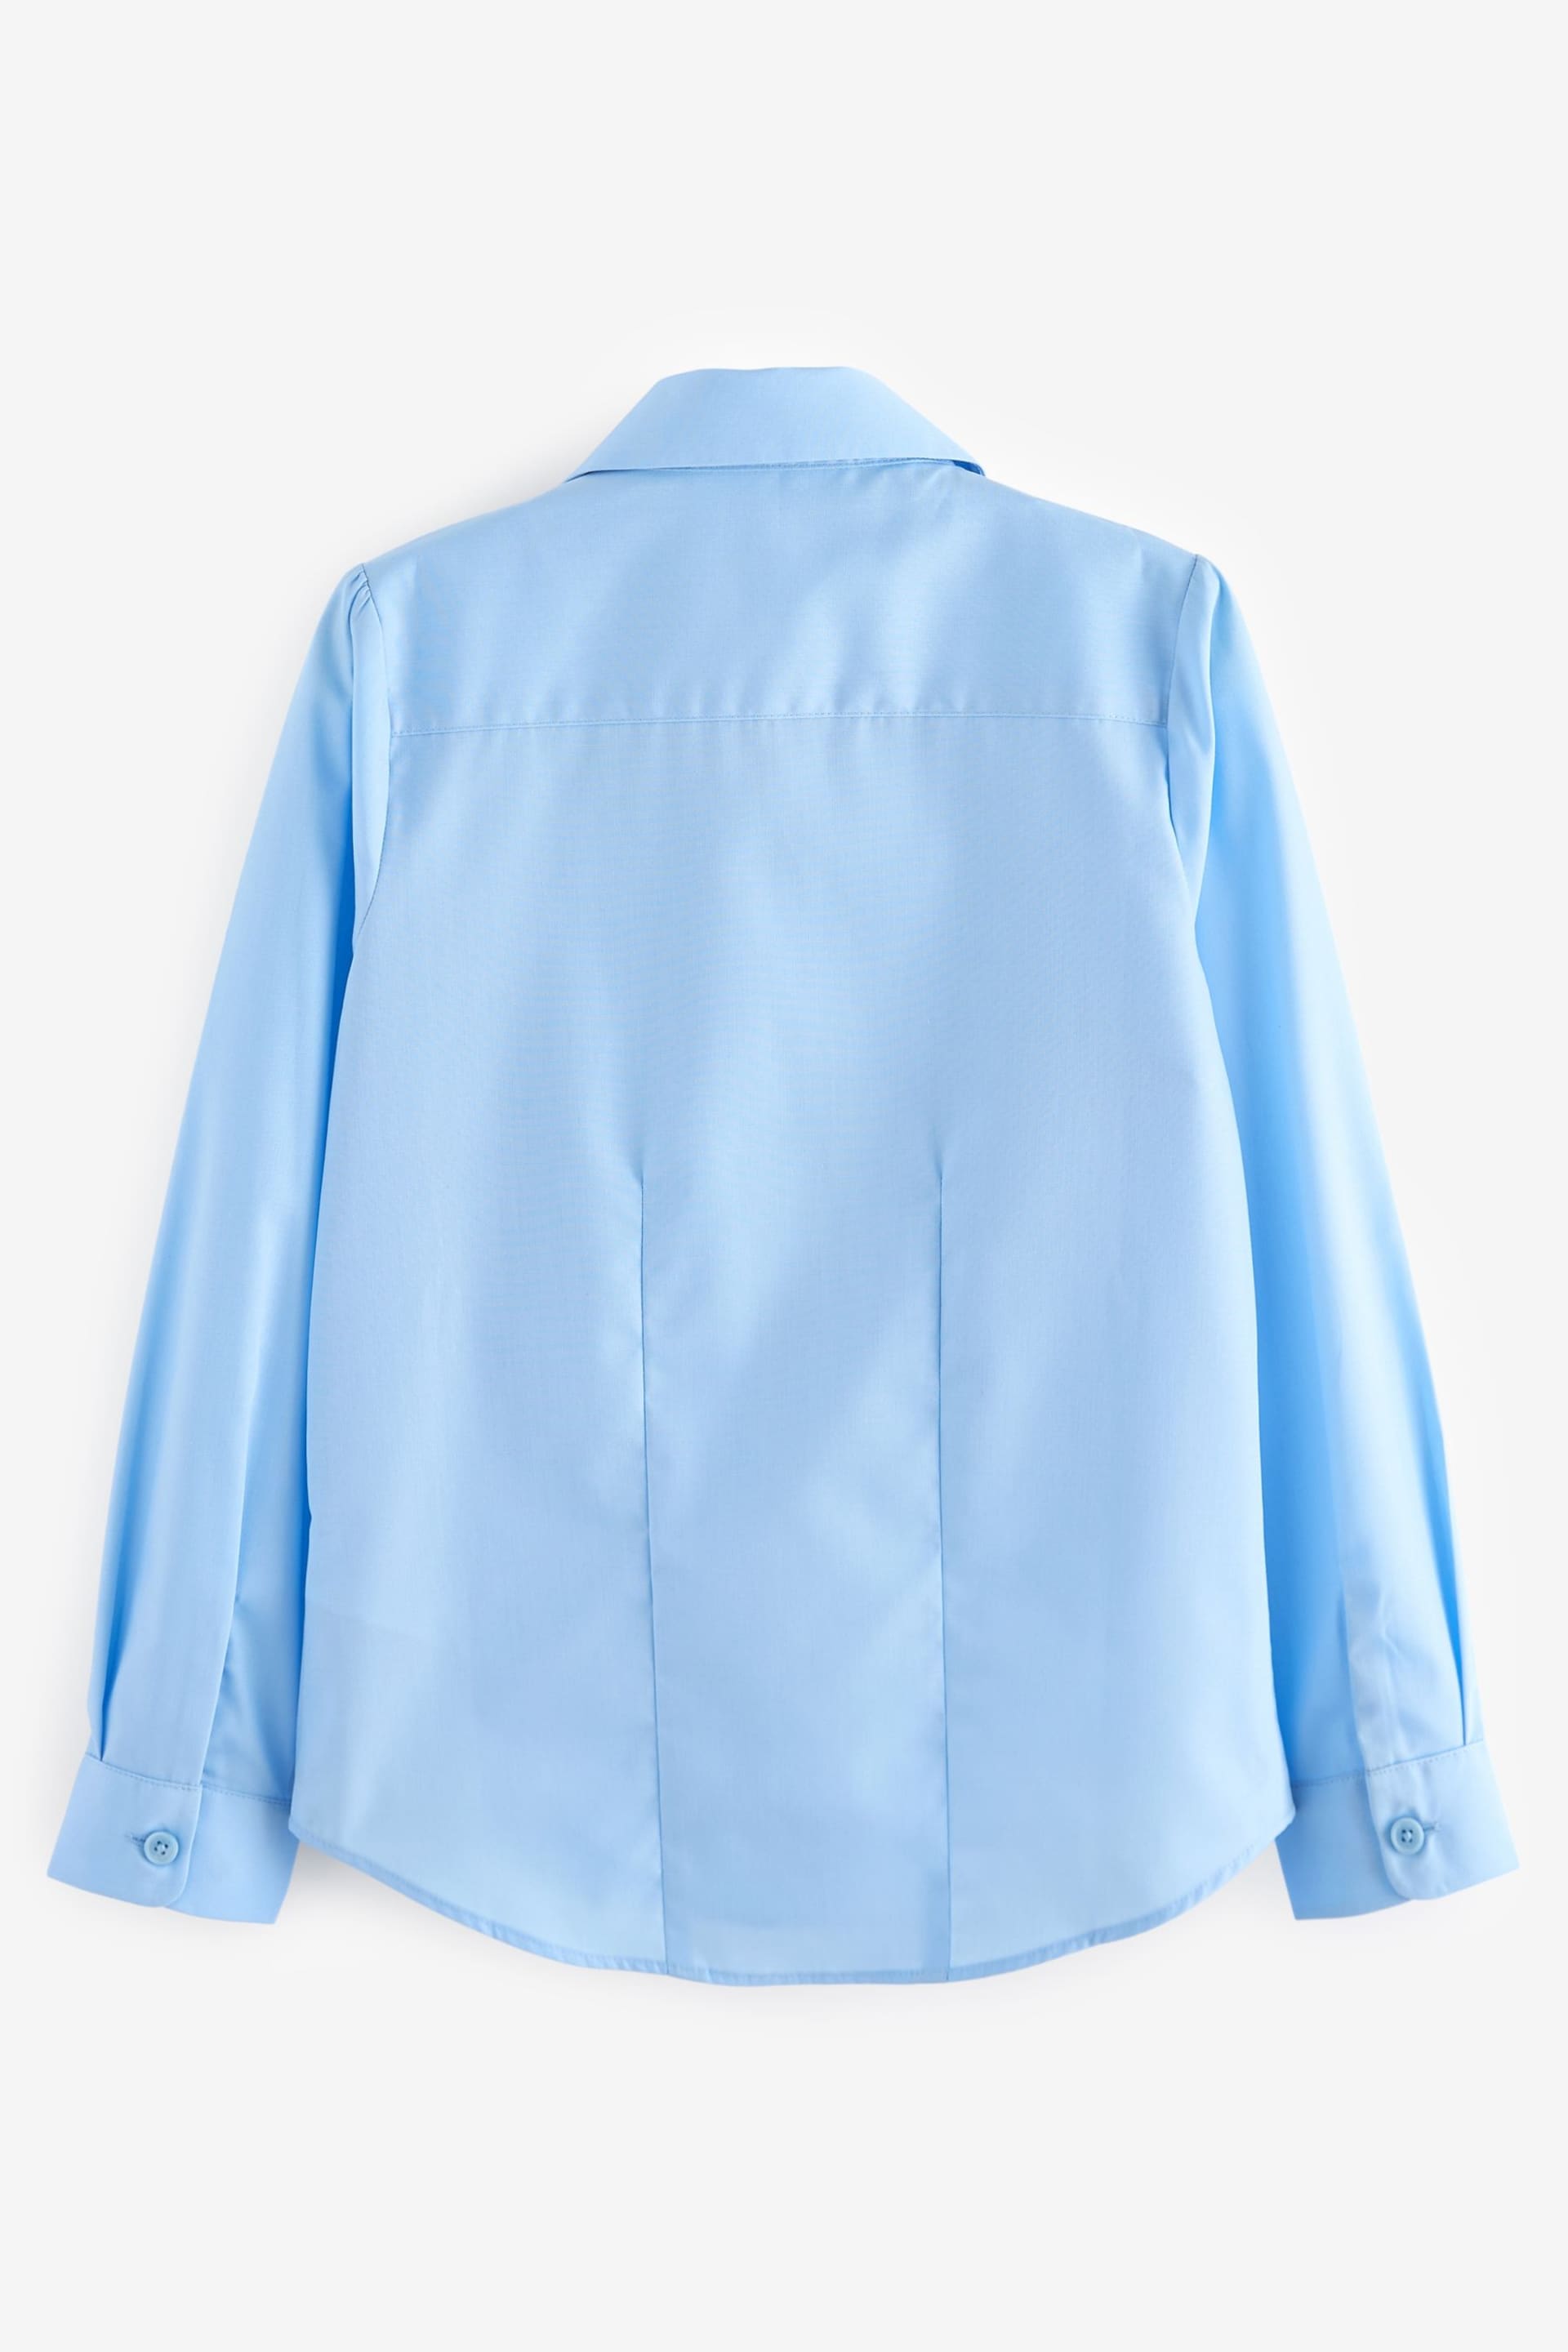 Clarks Blue Long Sleeve Girls School Shirts 2 Pack - Image 3 of 5